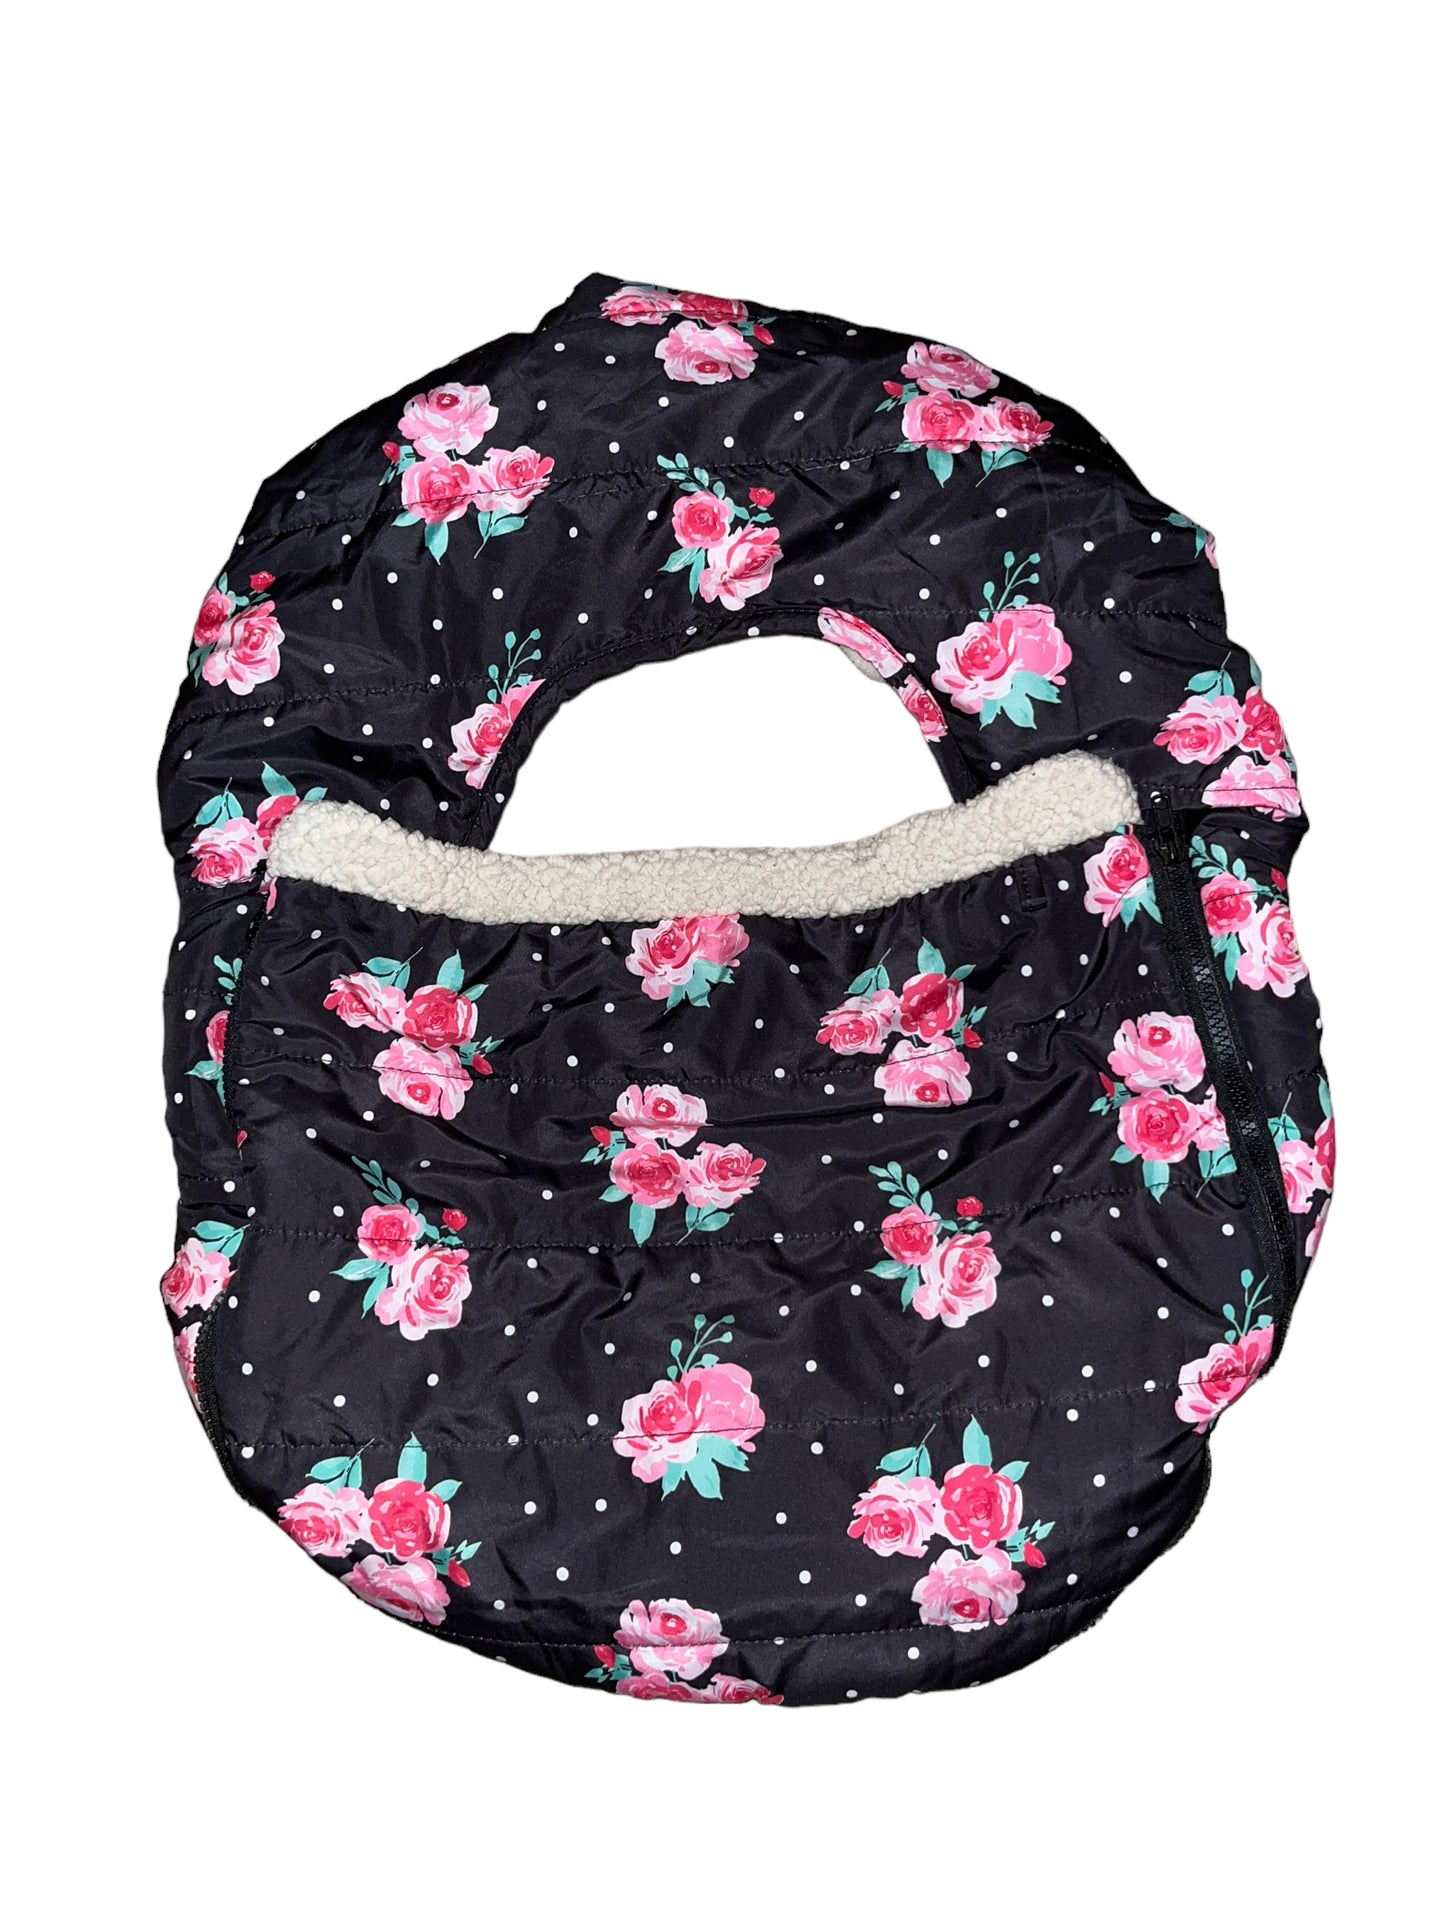 Peanutshell Floral Car Seat Cover